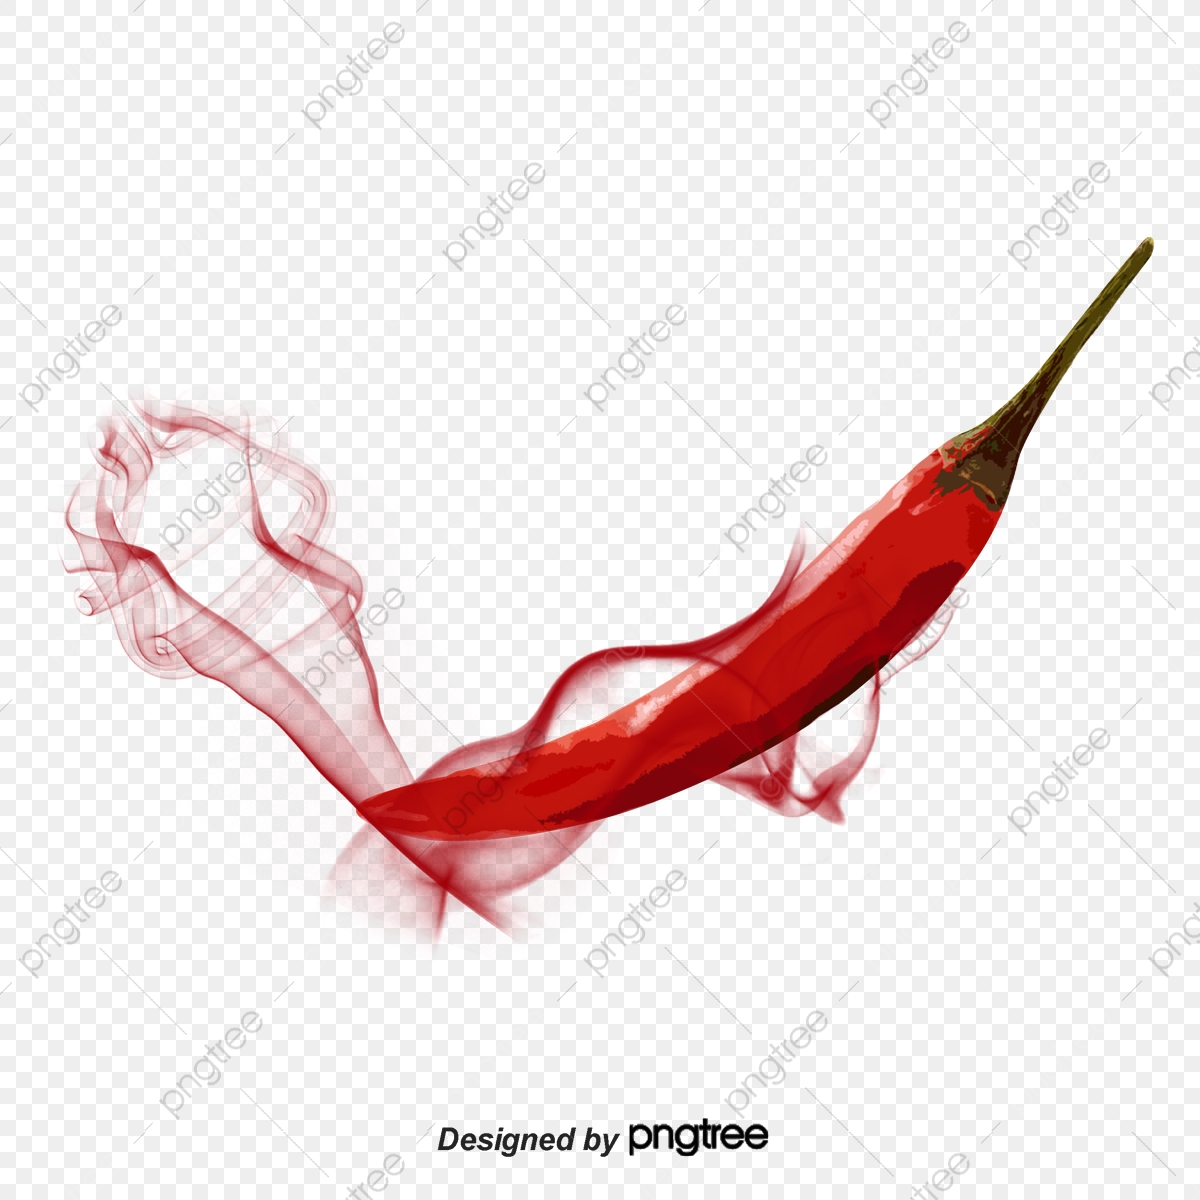 Chili clipart smoke. Red png transparent image